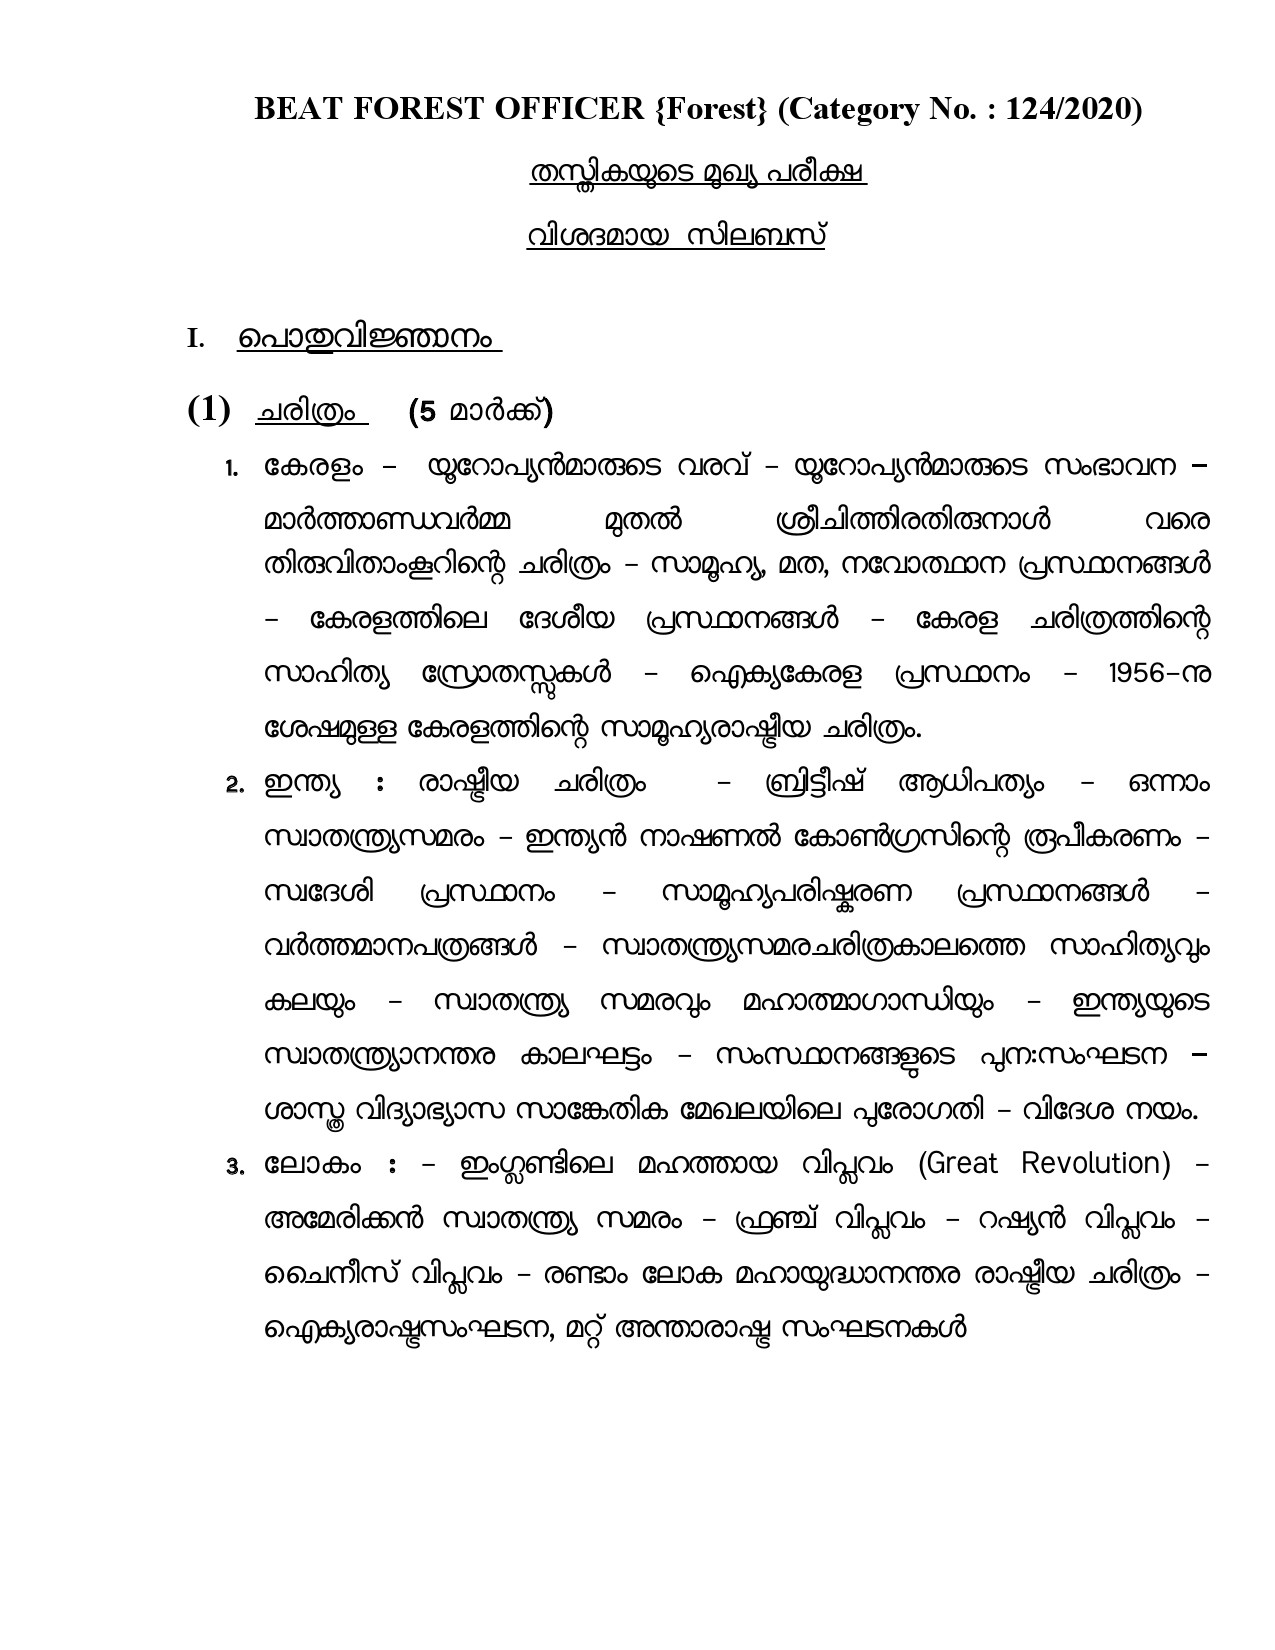 Beat Forest Officer Final Examination Syllabus For Plus Two Level - Notification Image 2